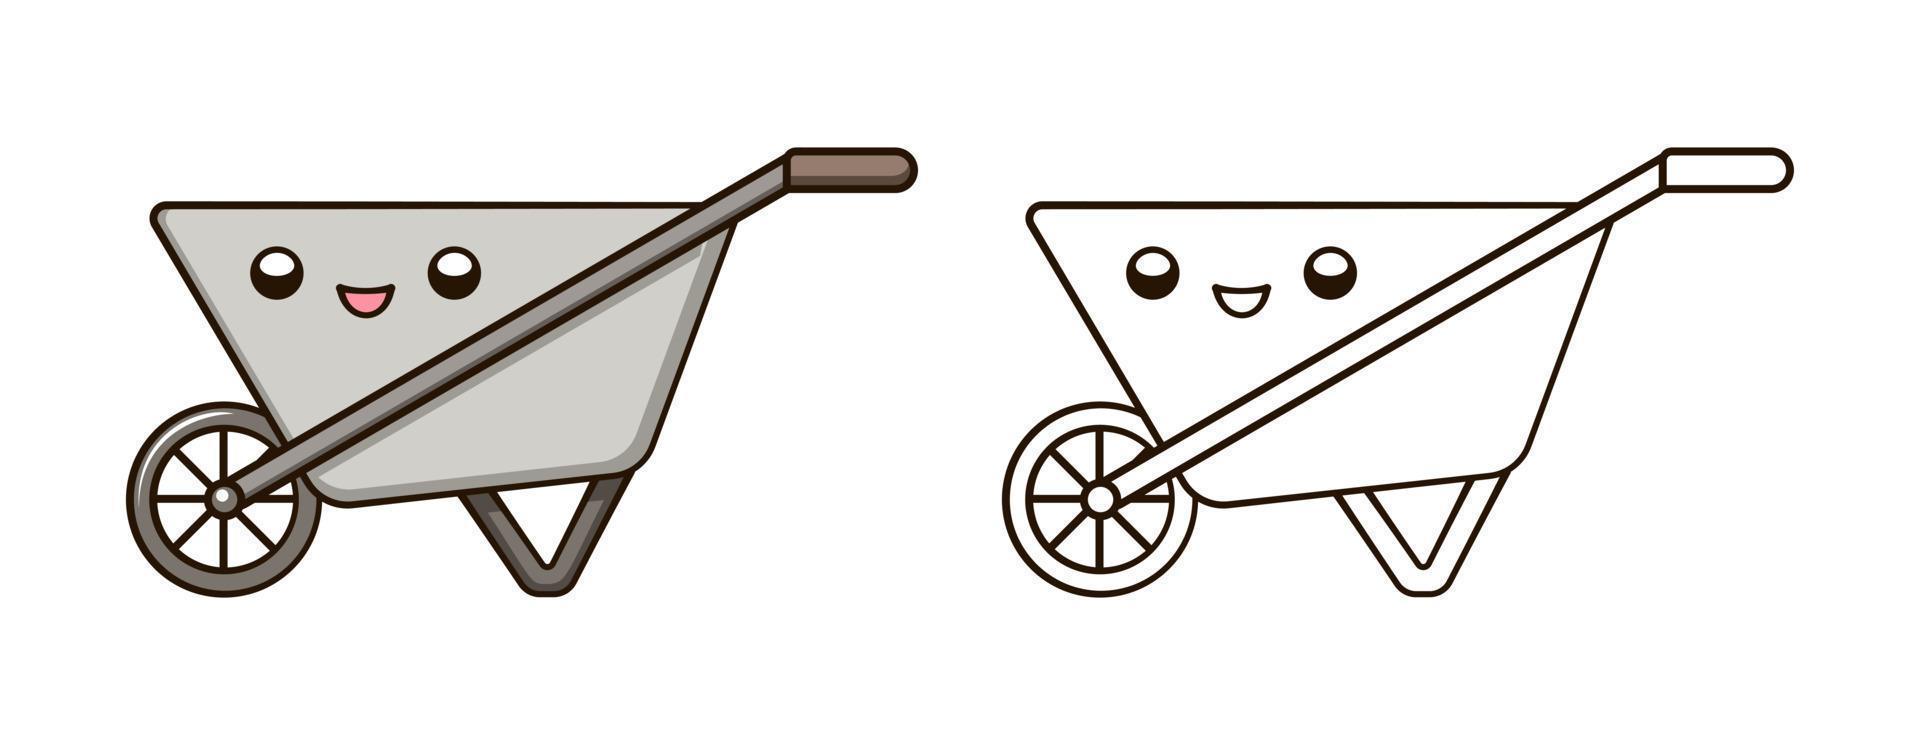 Empty steel wheelbarrow kawaii cartoon outline line art illustration. Gardening farming agriculture coloring book page activity worksheet for kids vector